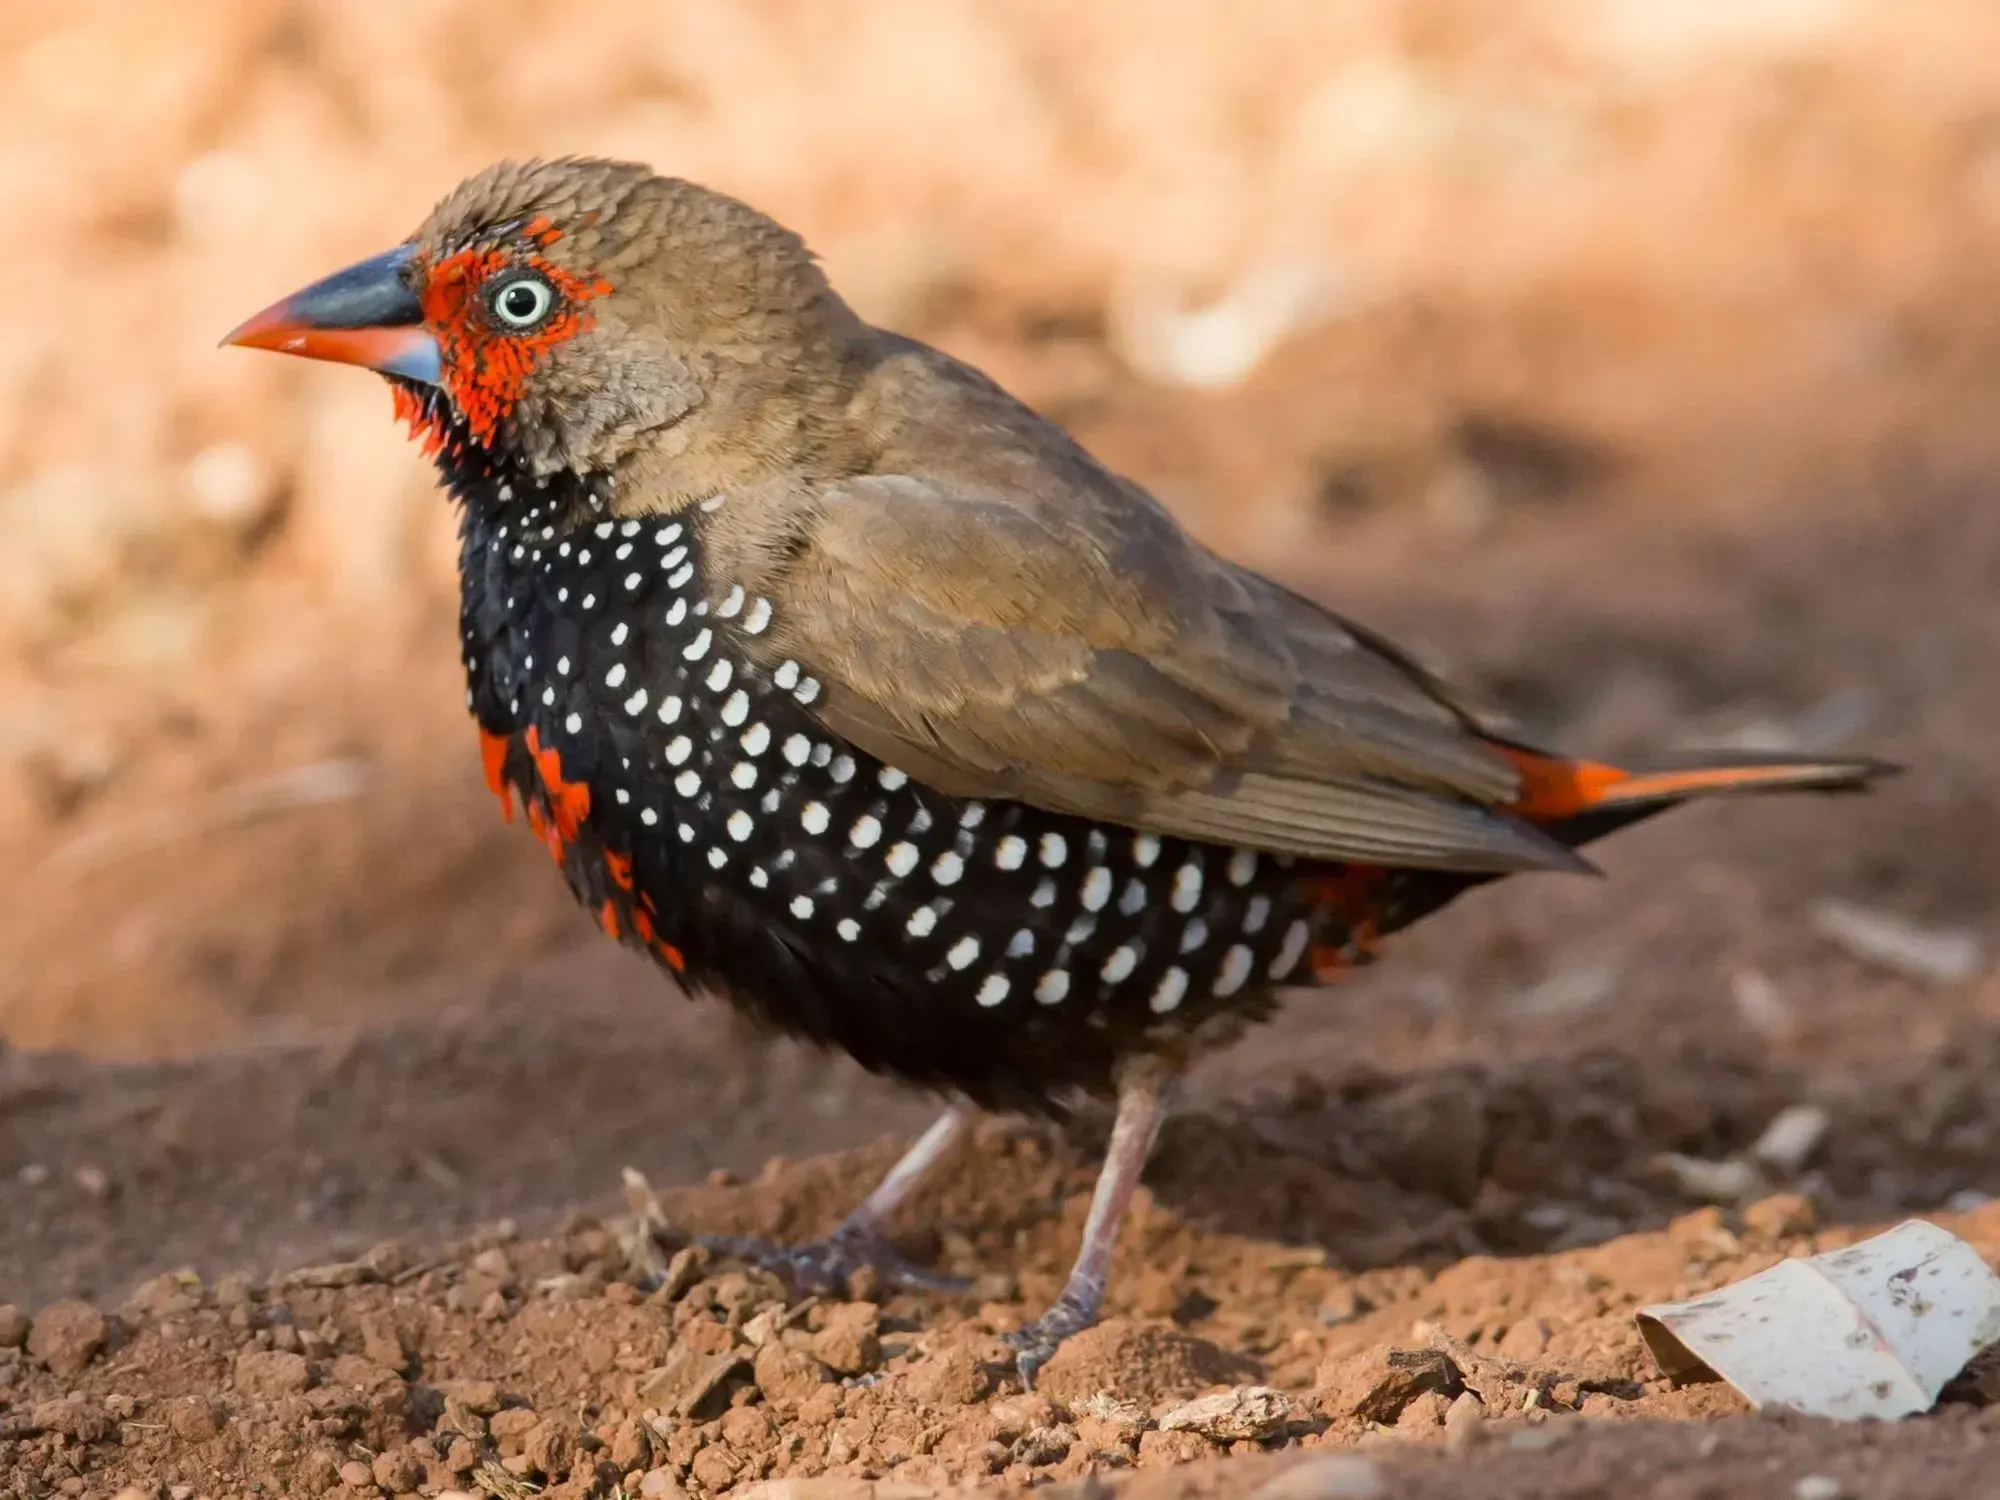 The painted finch has dark-brown to pinkish colored iris.